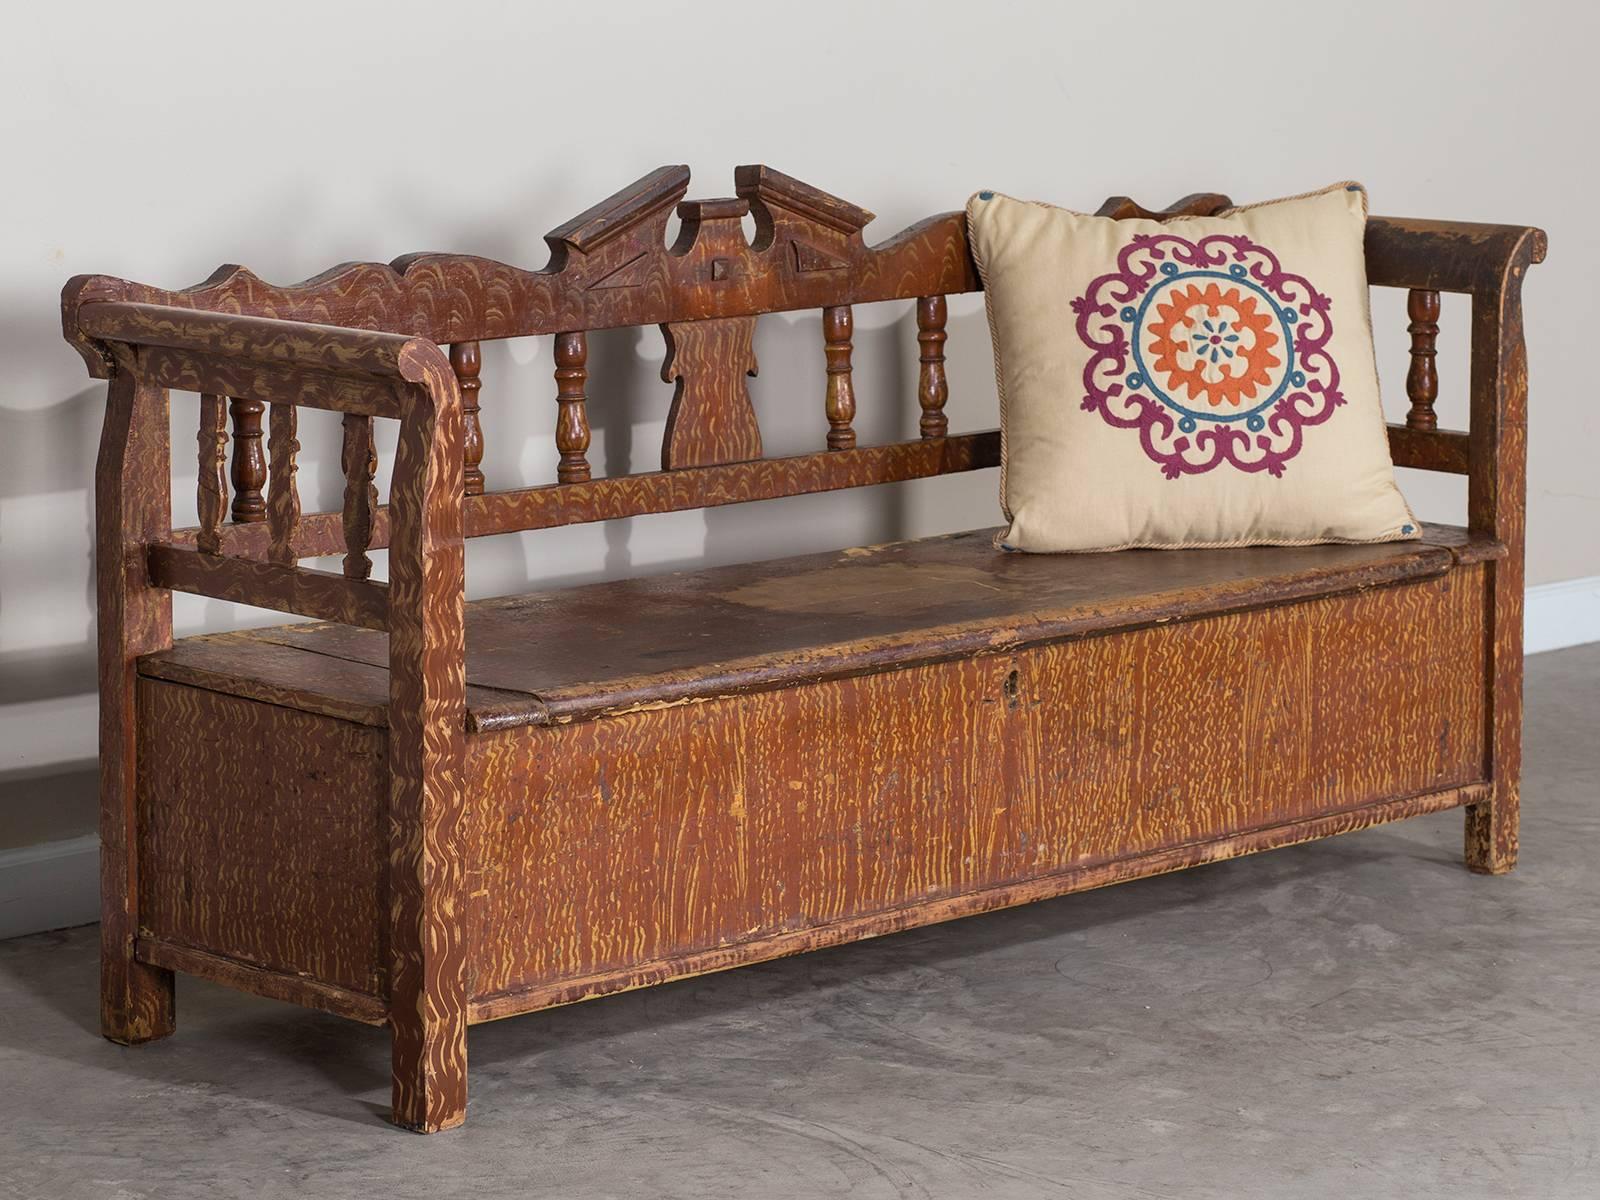 Receive our new selections direct from 1stdibs by email each week. Please click Follow Dealer below and see them first!

The lovely symmetry and hand-painted faux finish on this antique Romanian Hungarian bench, circa 1875 remains as handsome